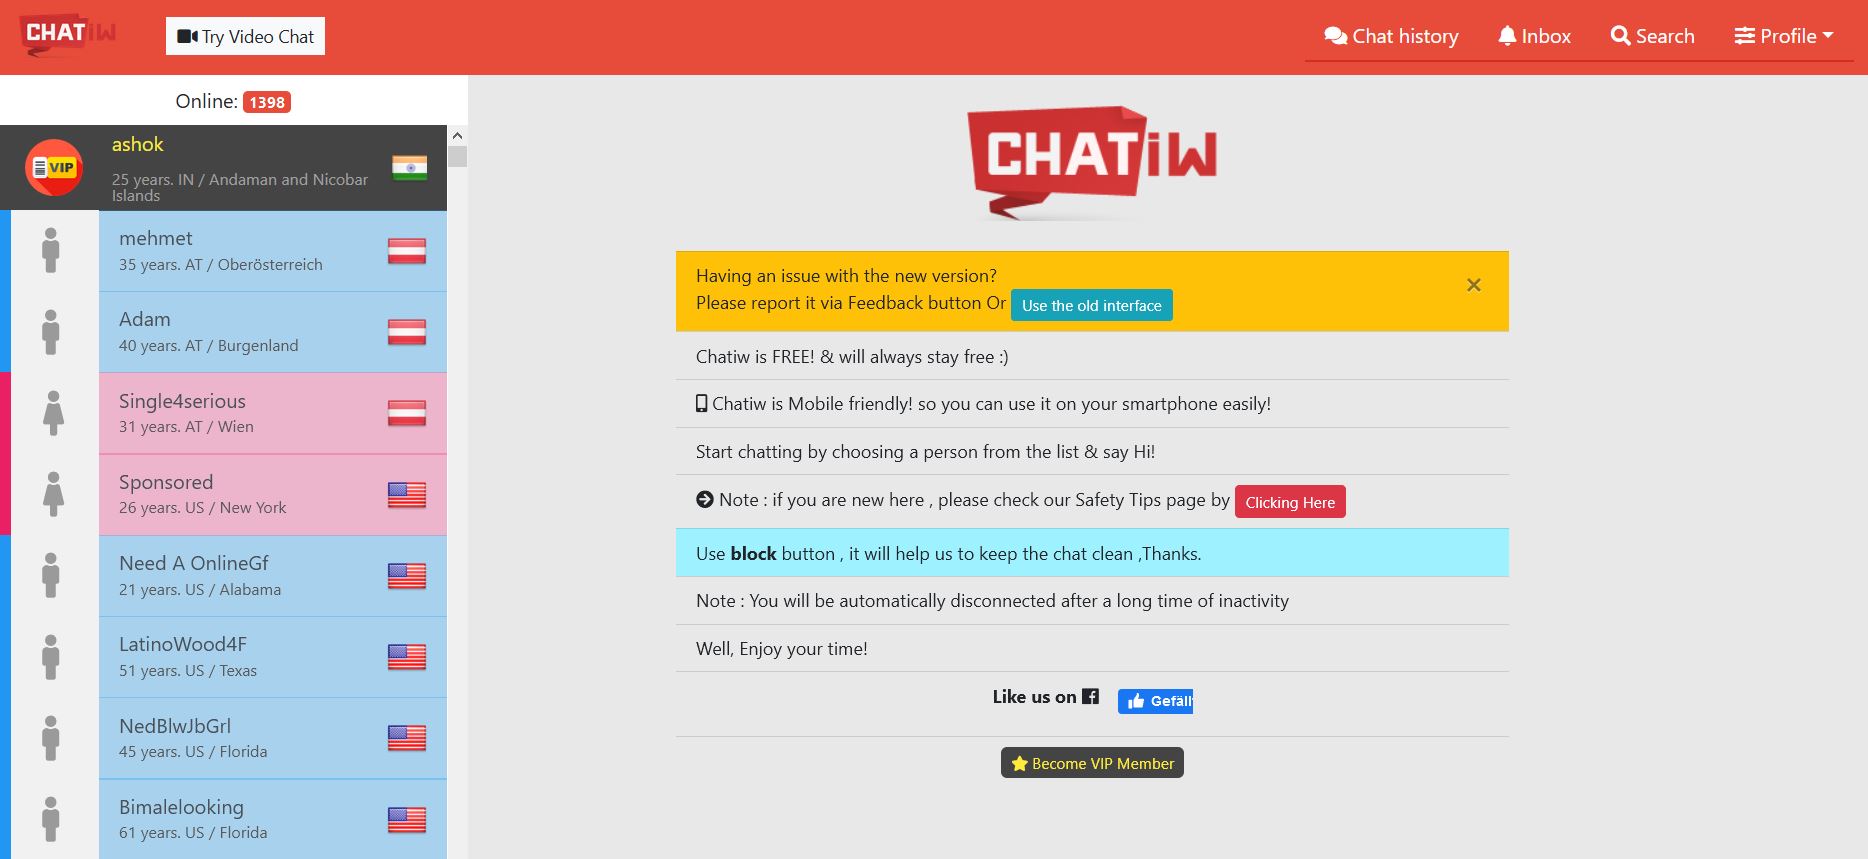 Chatiw is an online chat with many users